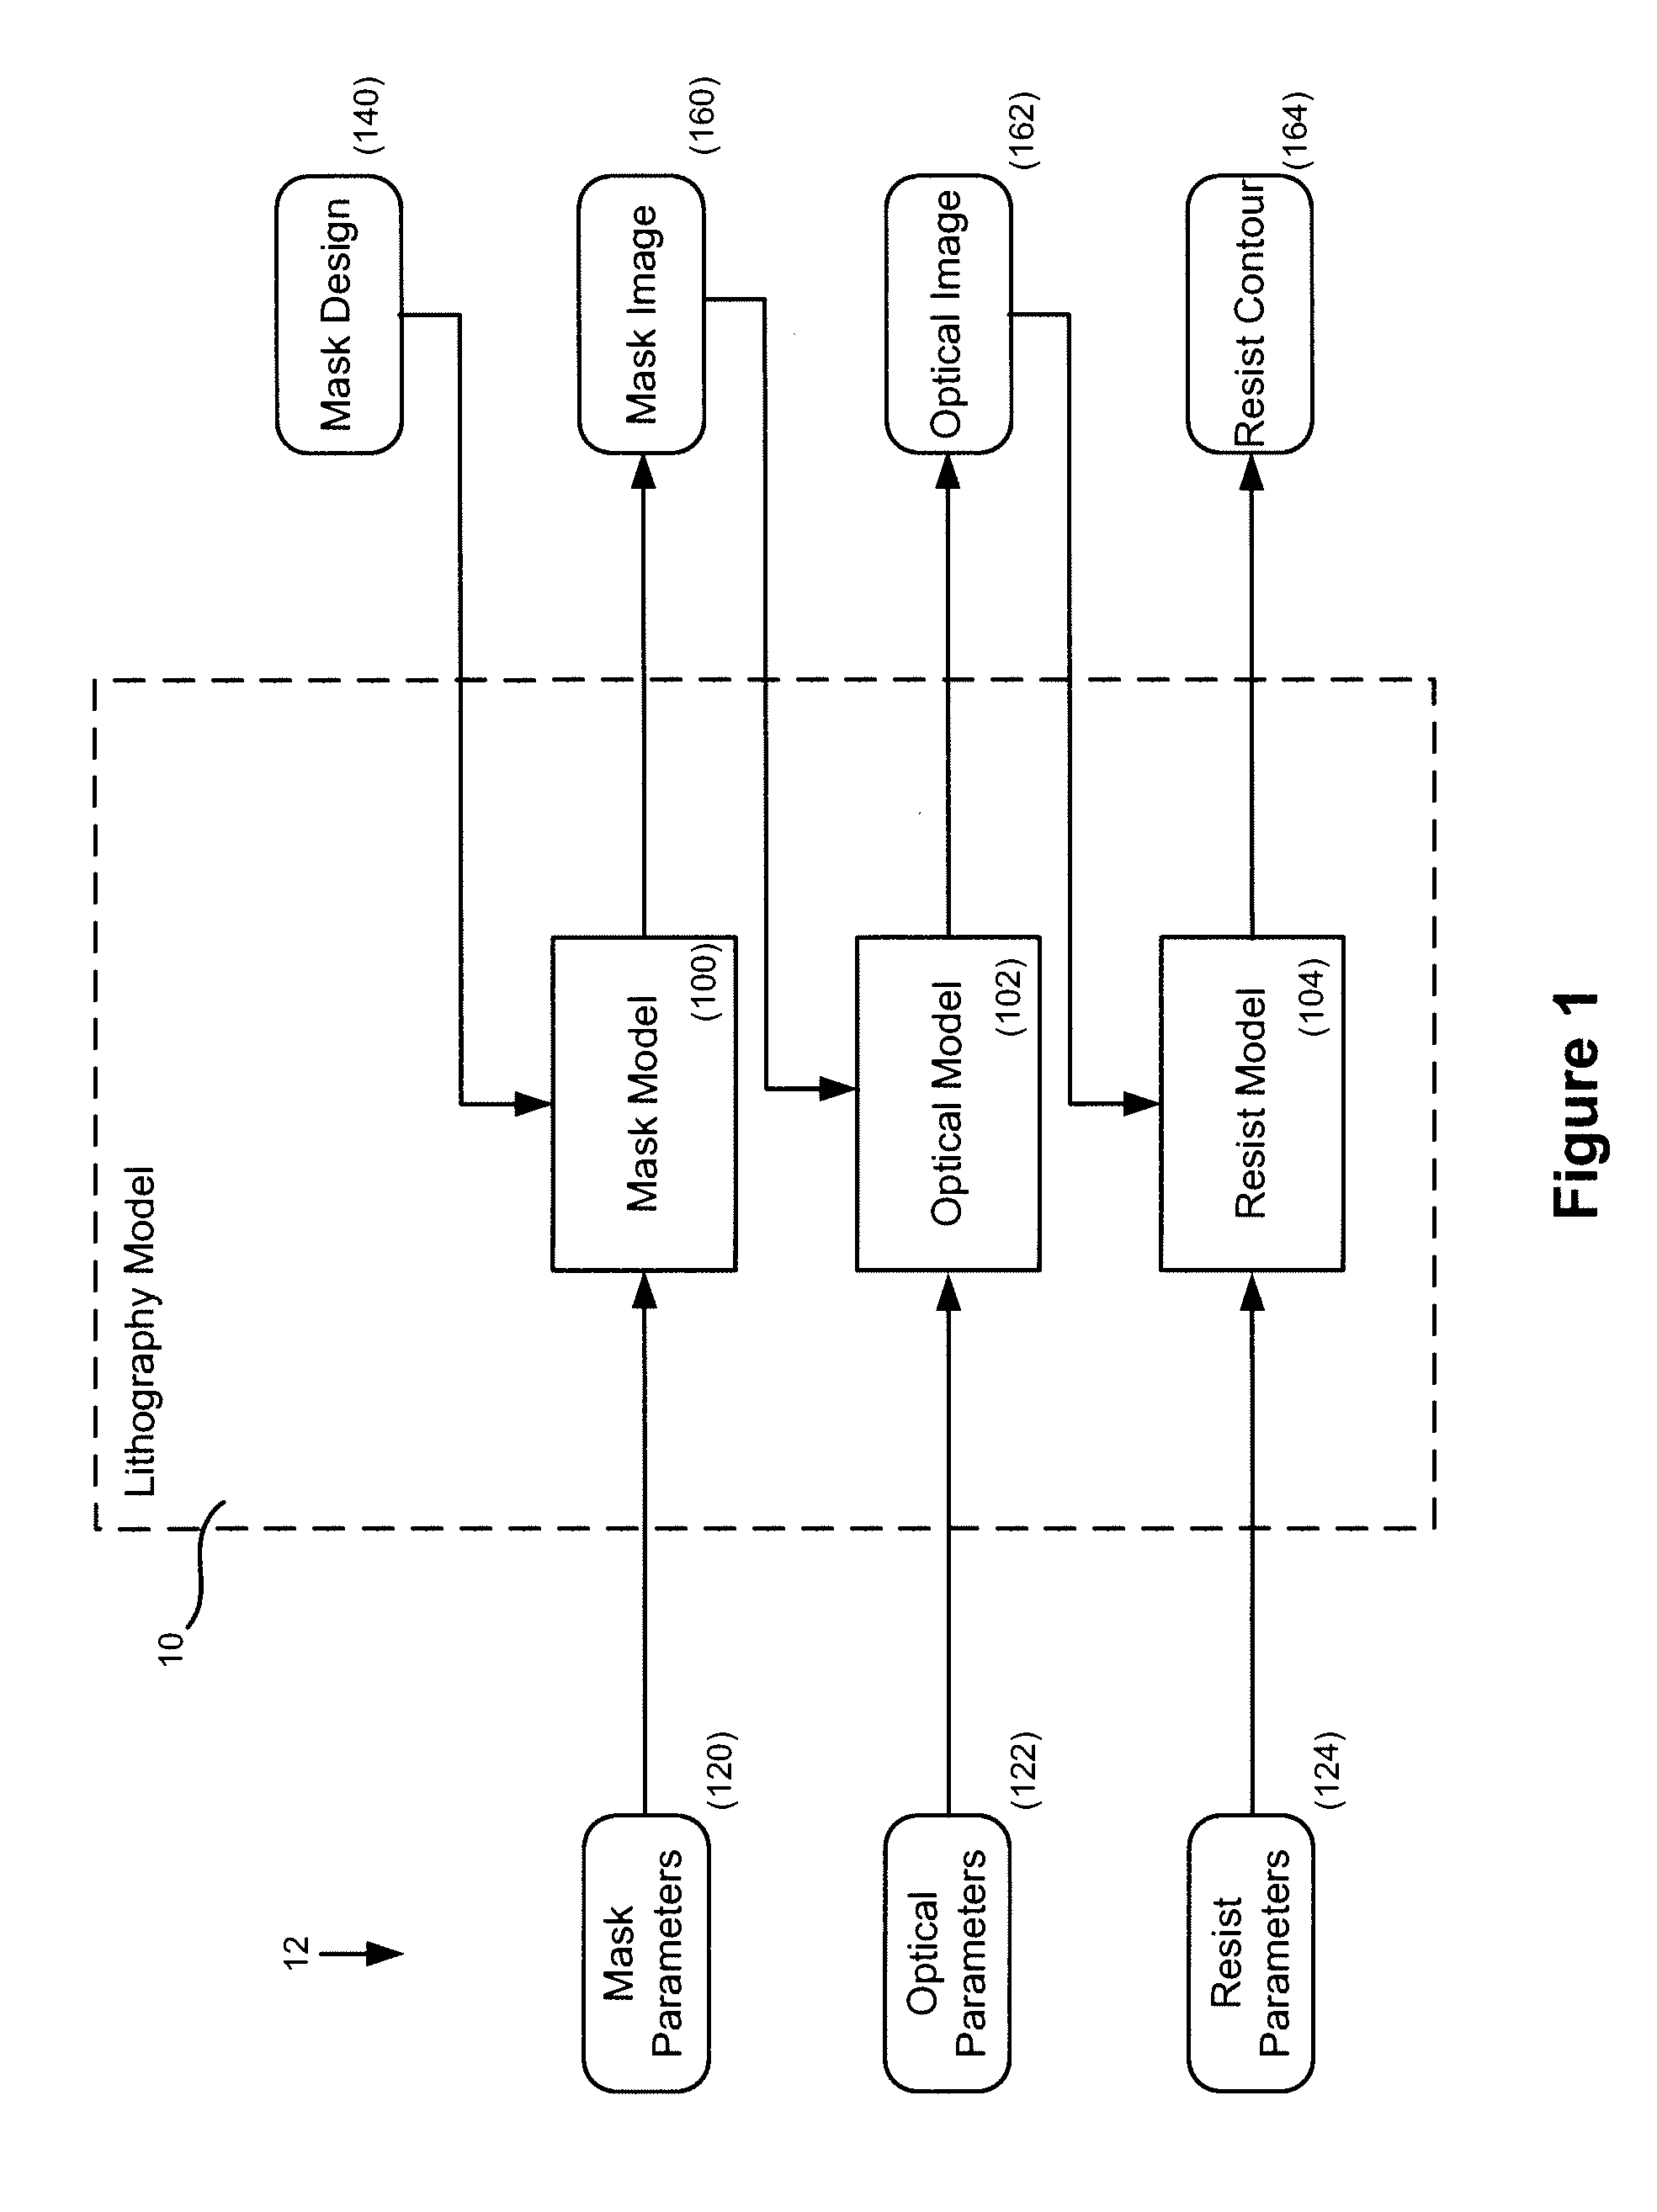 Model-based process simulation systems and methods